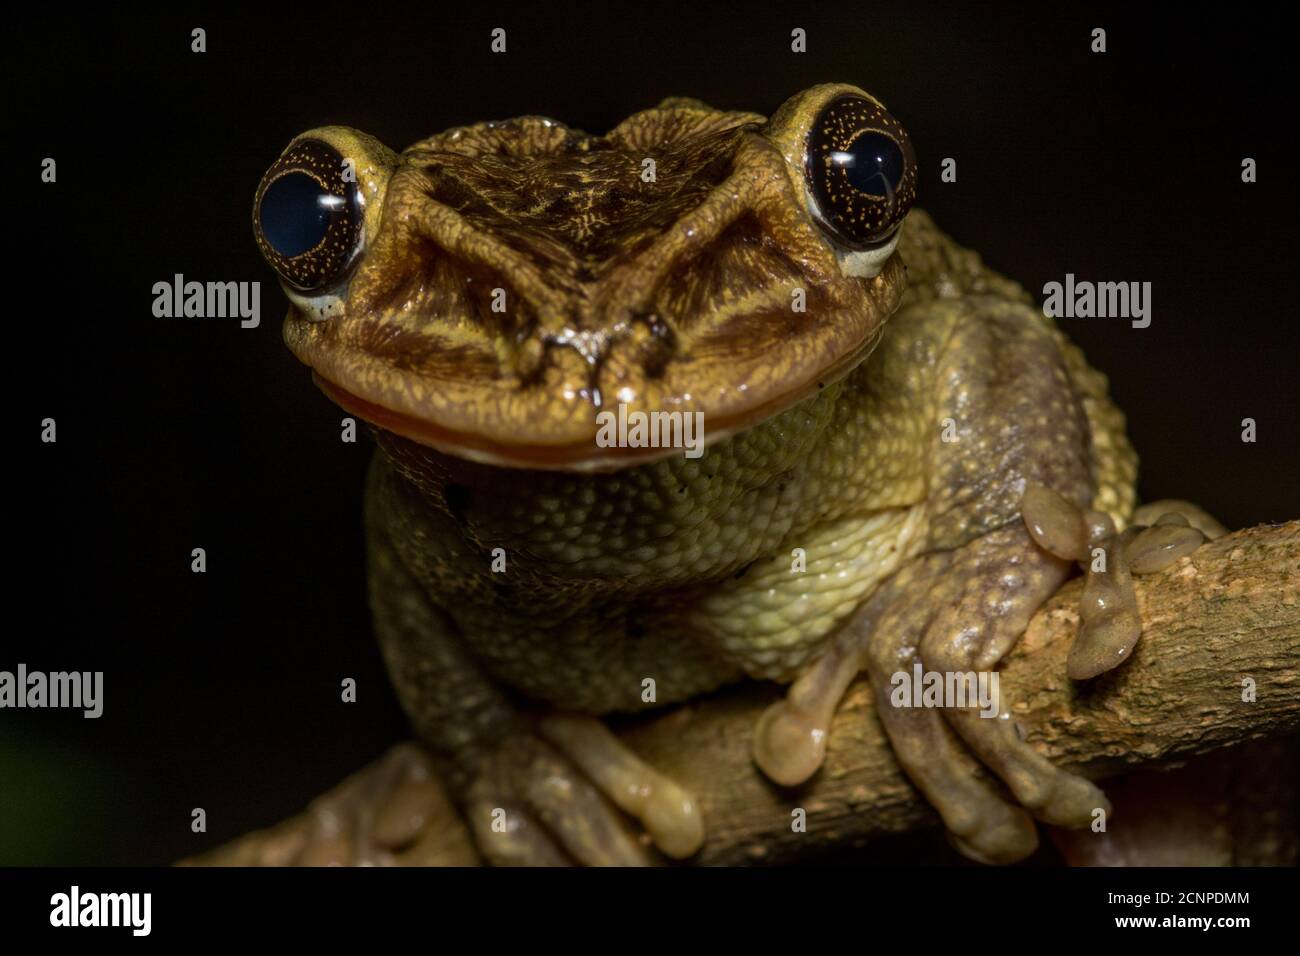 Jordan's casque headed tree frog (Trachycephalus jordani) from the dry forests of Western Ecuador is one of the most unusual frogs in the country. Stock Photo